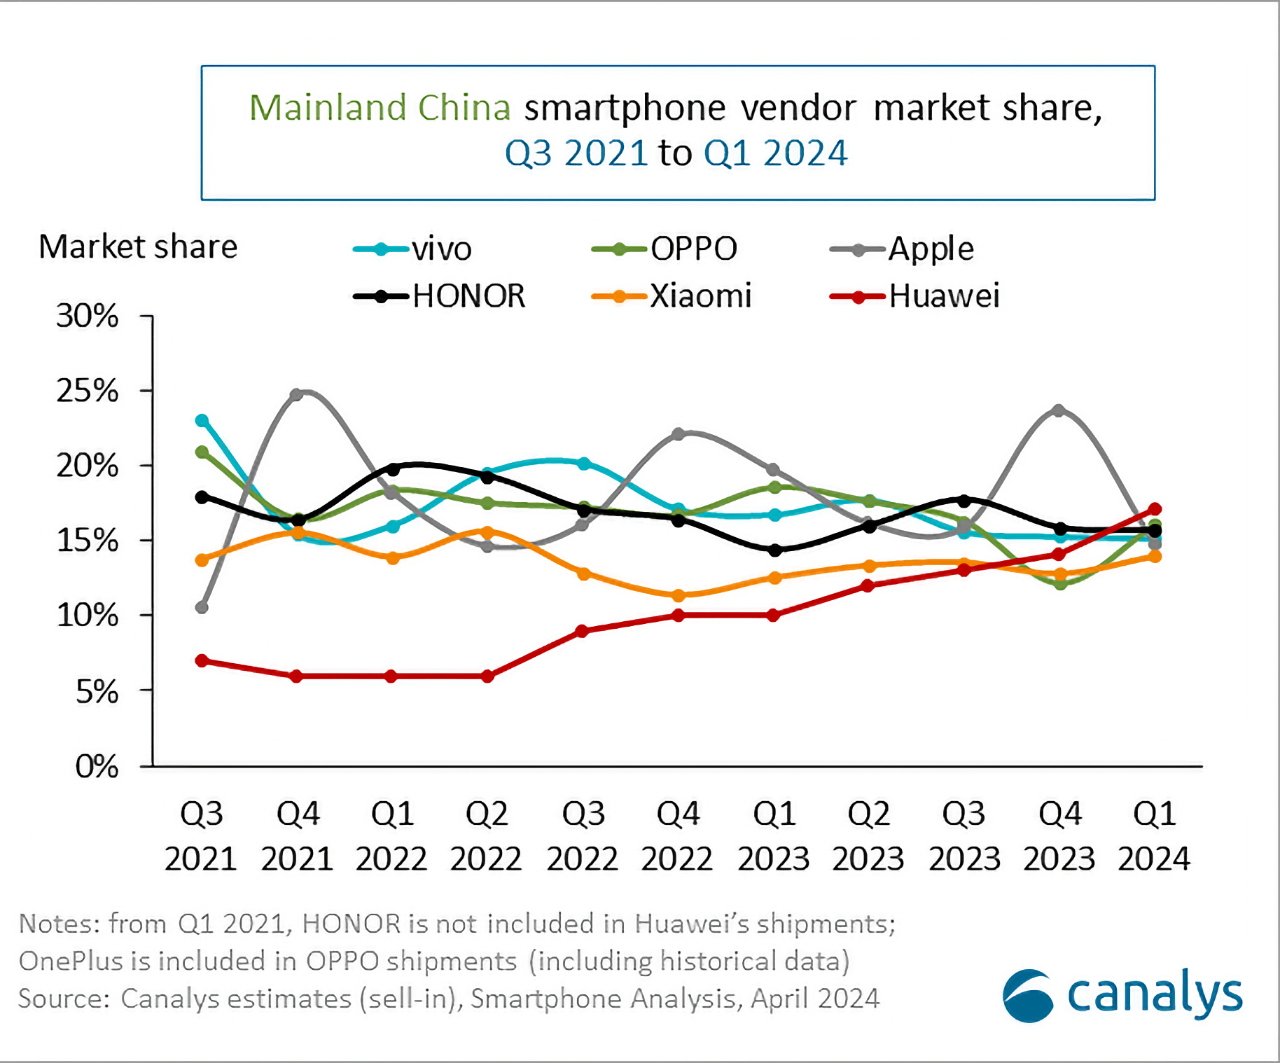 Line chart showing Mainland China smartphone vendor market share from Q3 2021 to Q1 2024 with trend lines for Vivo, OPPO, HONOR, Xiaomi, Apple, and Huawei.